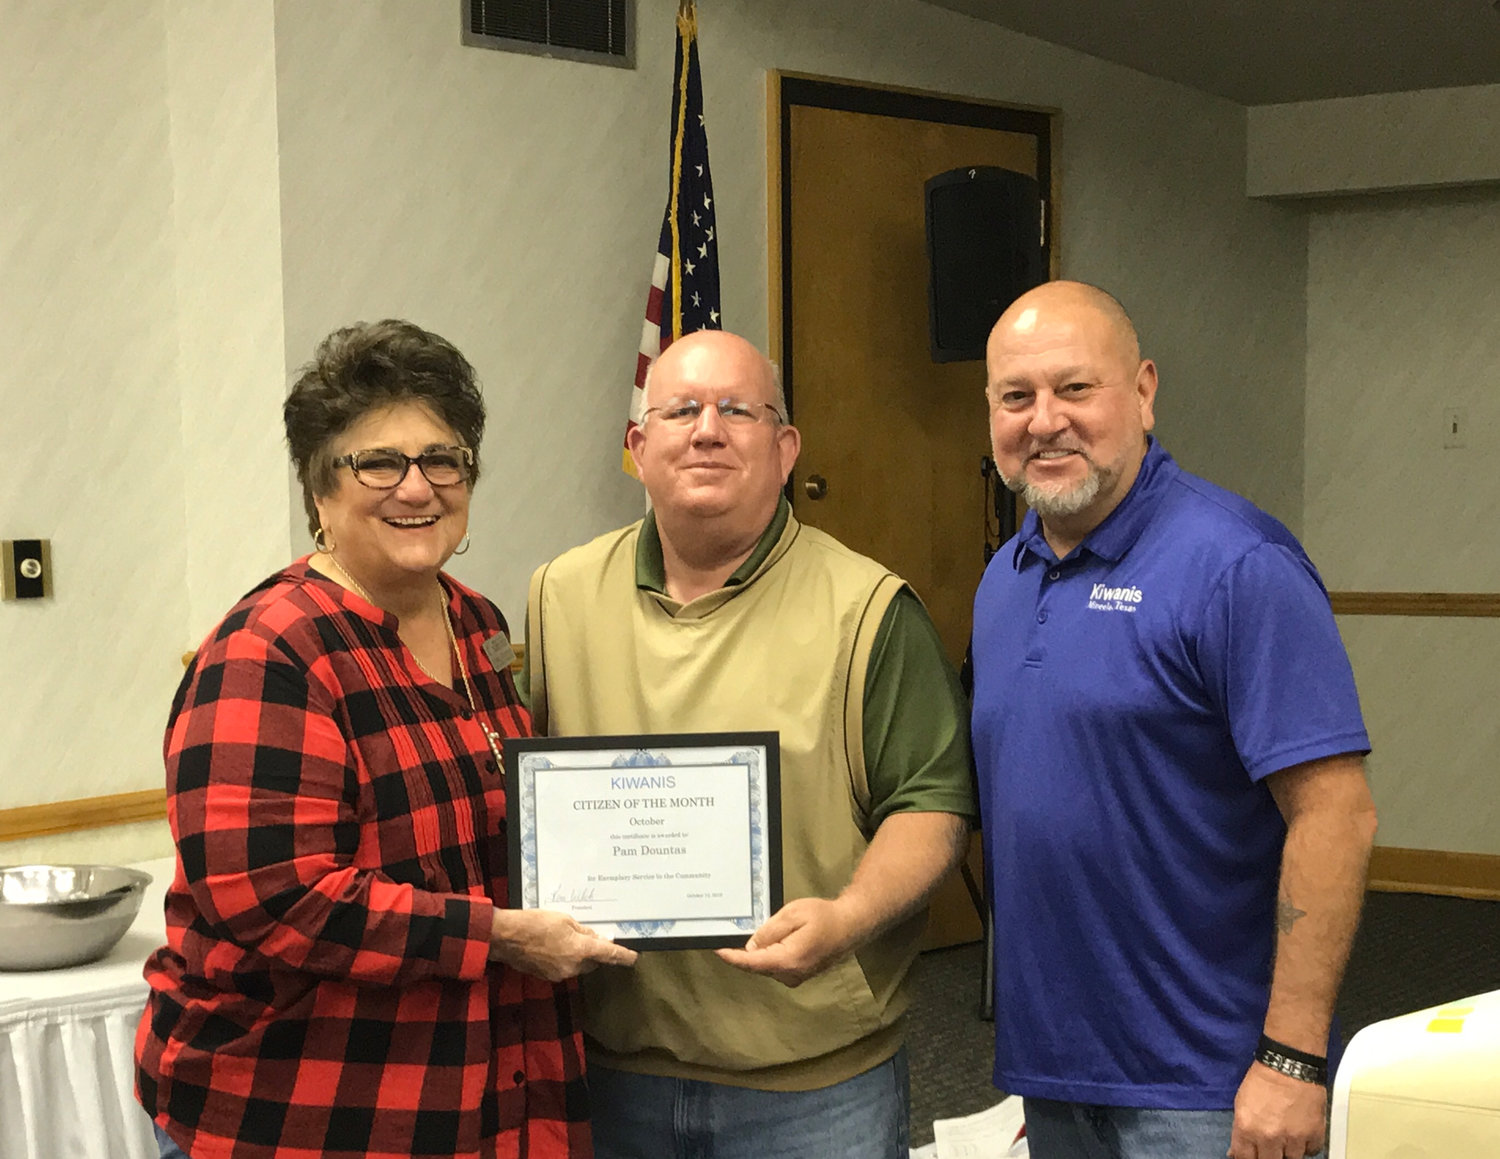 Pam Dauntas was presented as the October Citizen of the Month by Mineola Kiwanis President Kevin White and Kiwanian David Huston. Pam is the seniors minister at the Mineola First United Methodist Church. Among her many activities, is her involvement in rescuing abused horses.